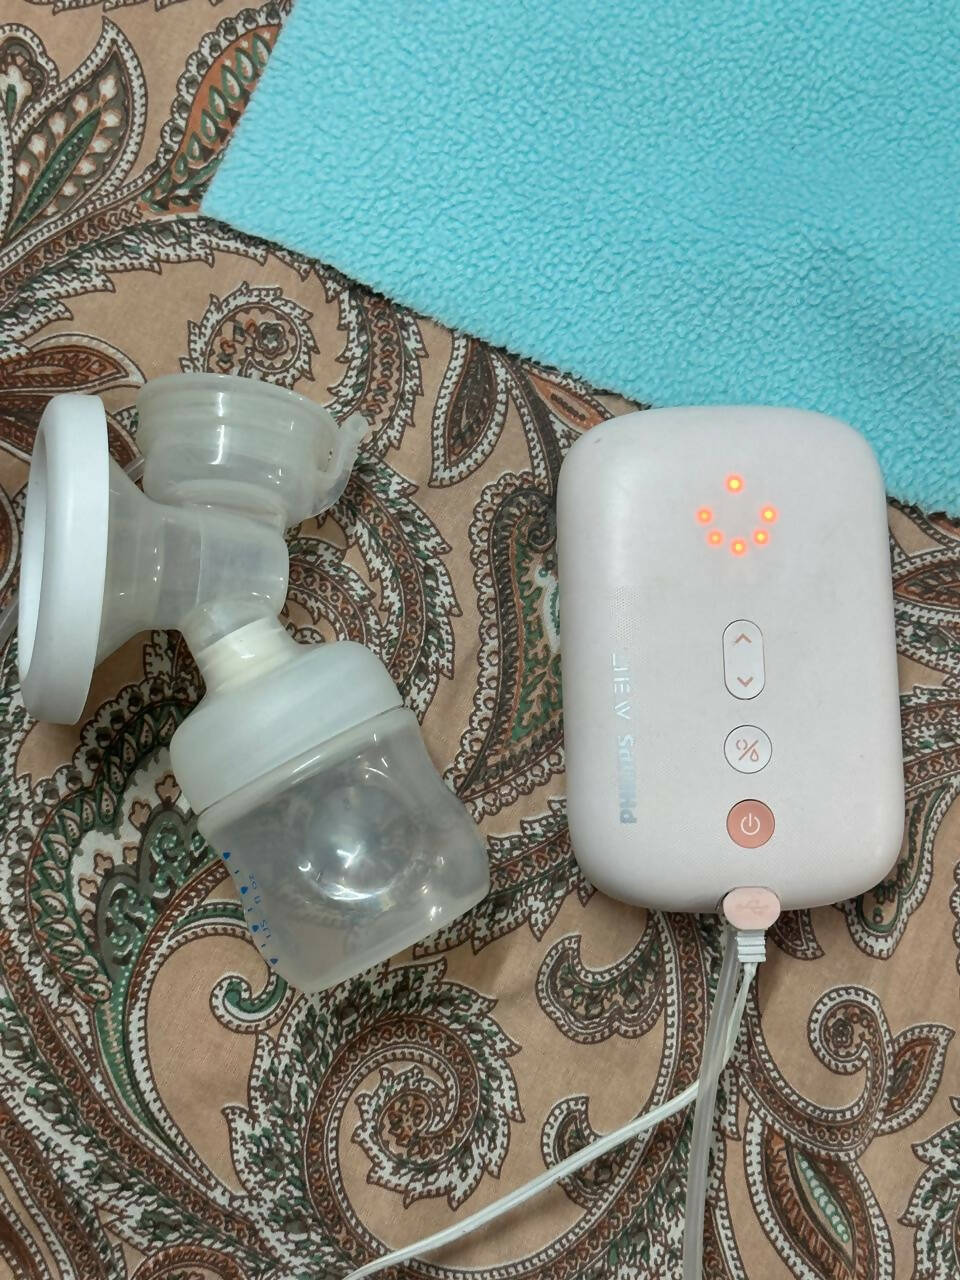 PHILIPS electric breast pump- automatic